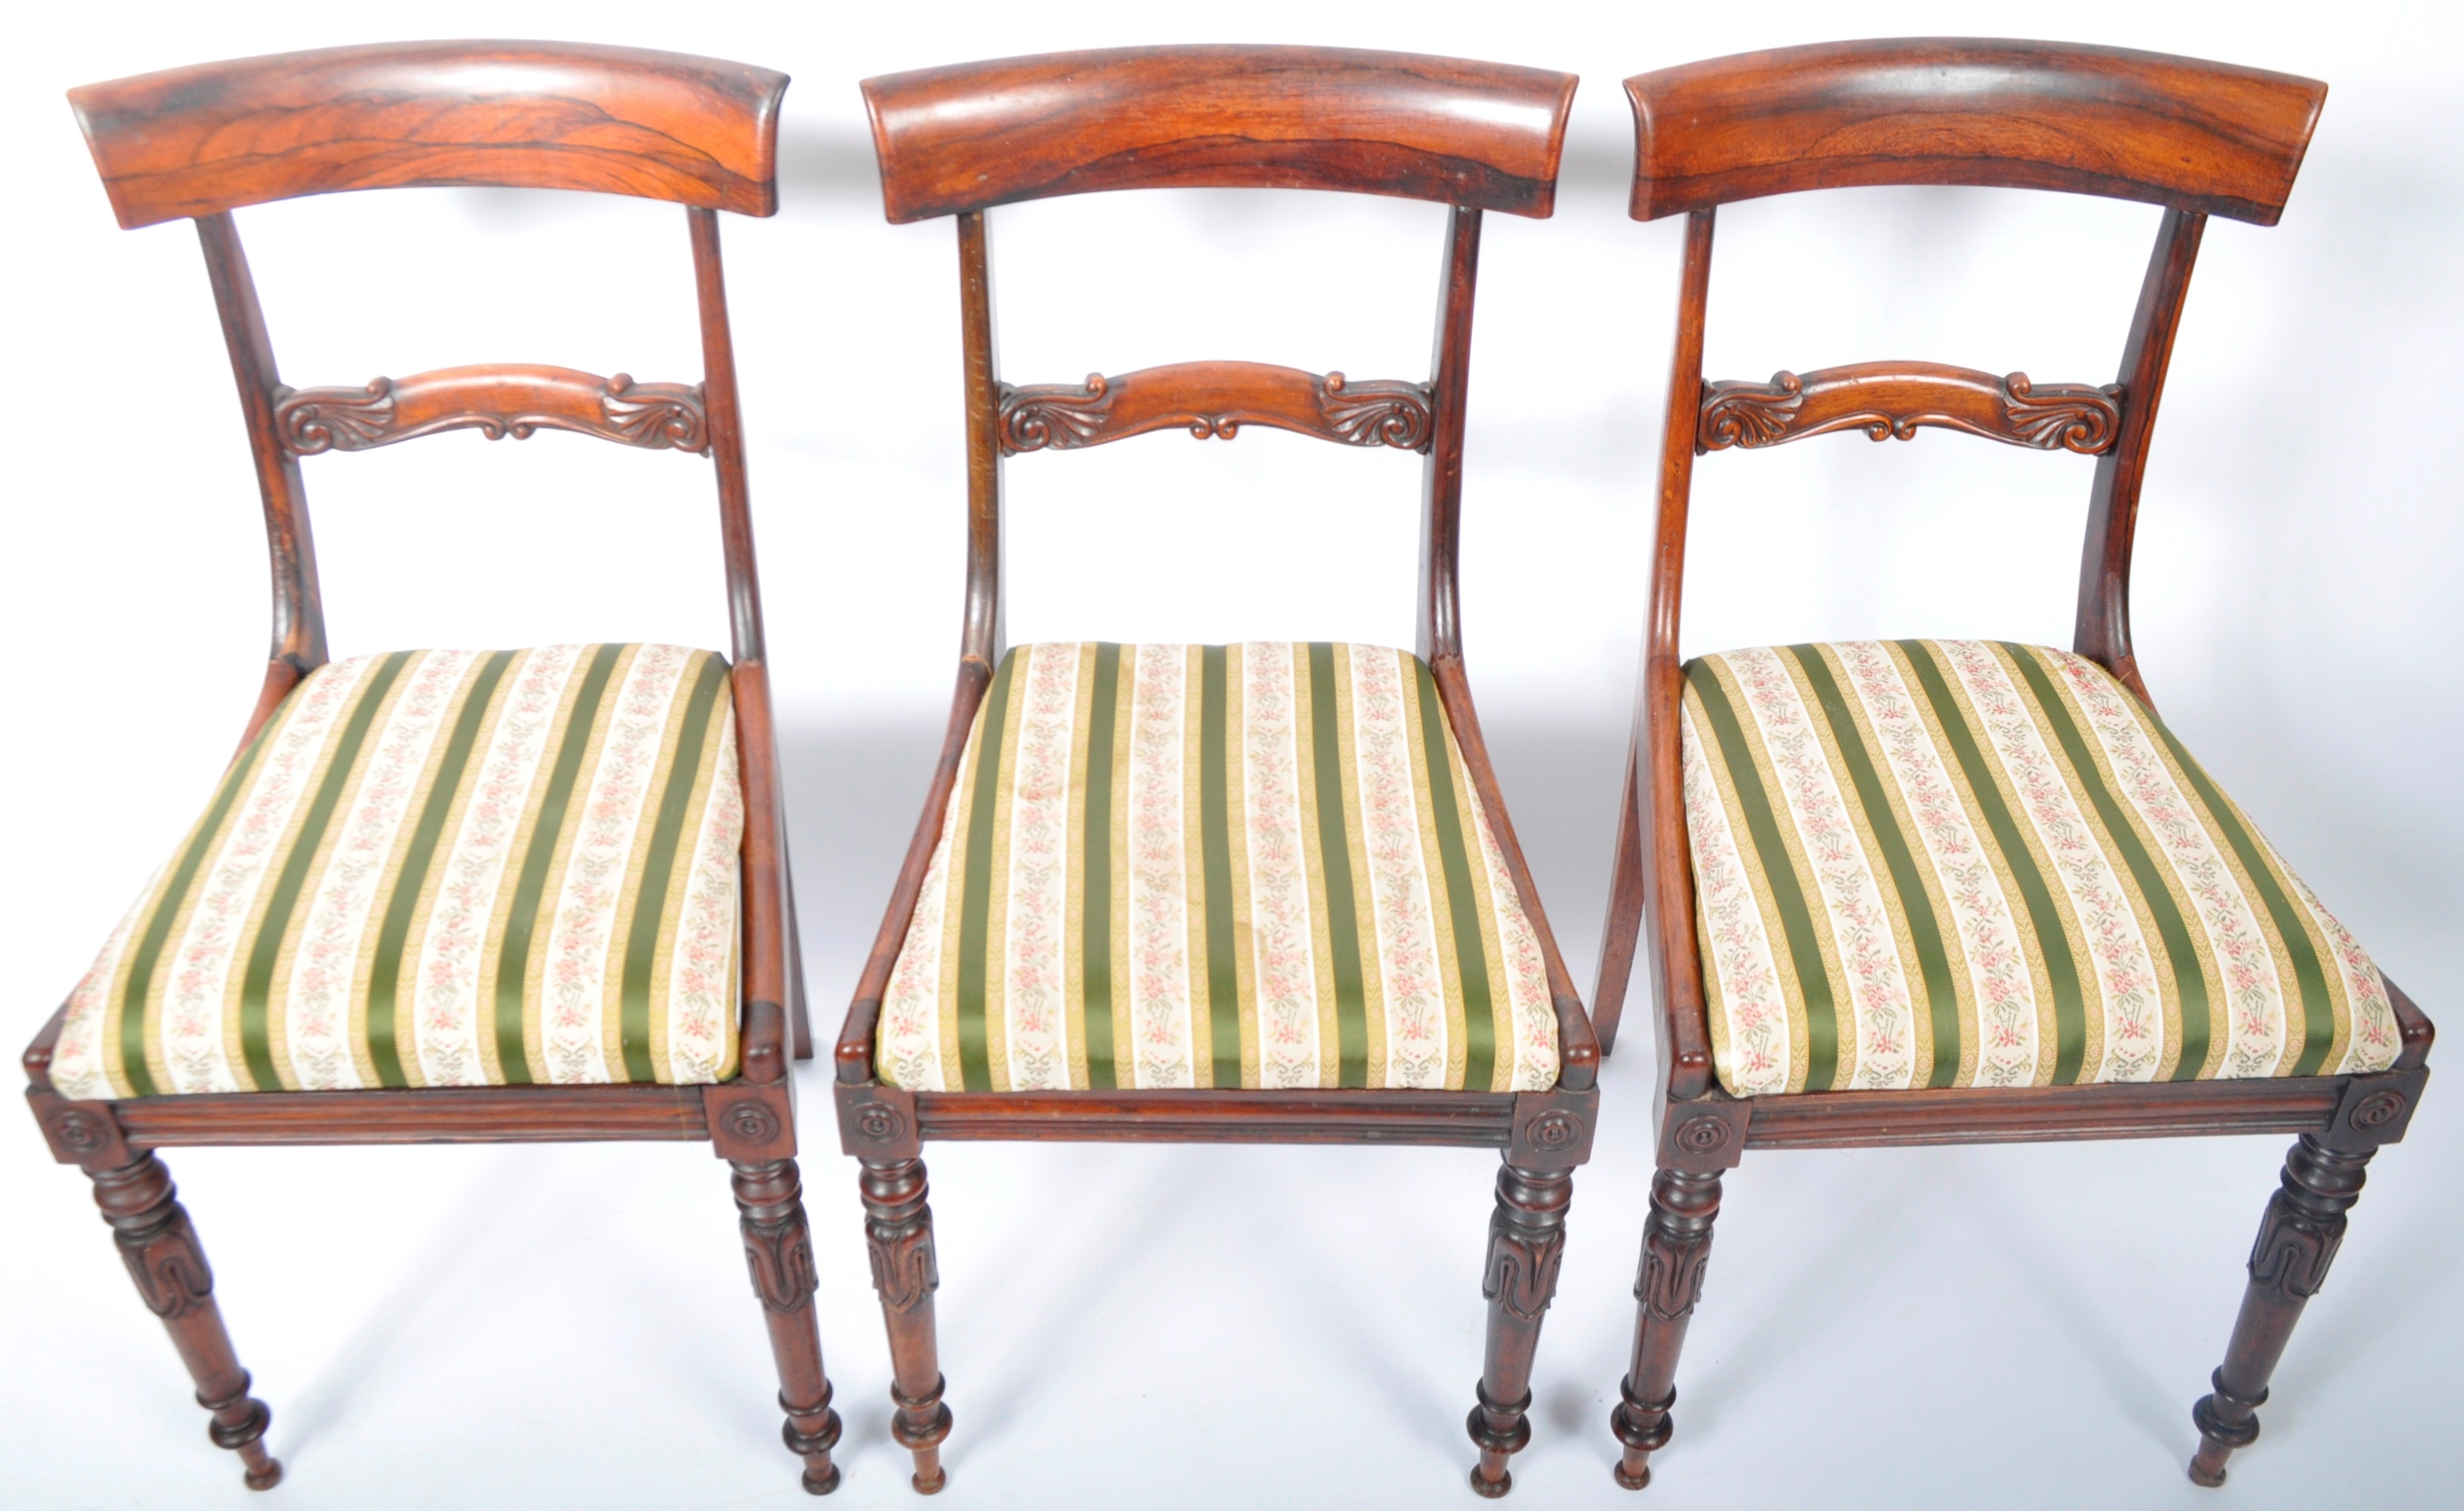 SET OF SIX ANTIQUE ROSEWOOD DINING CHAIRS IN THE GILLOWS STYLE - Image 3 of 12